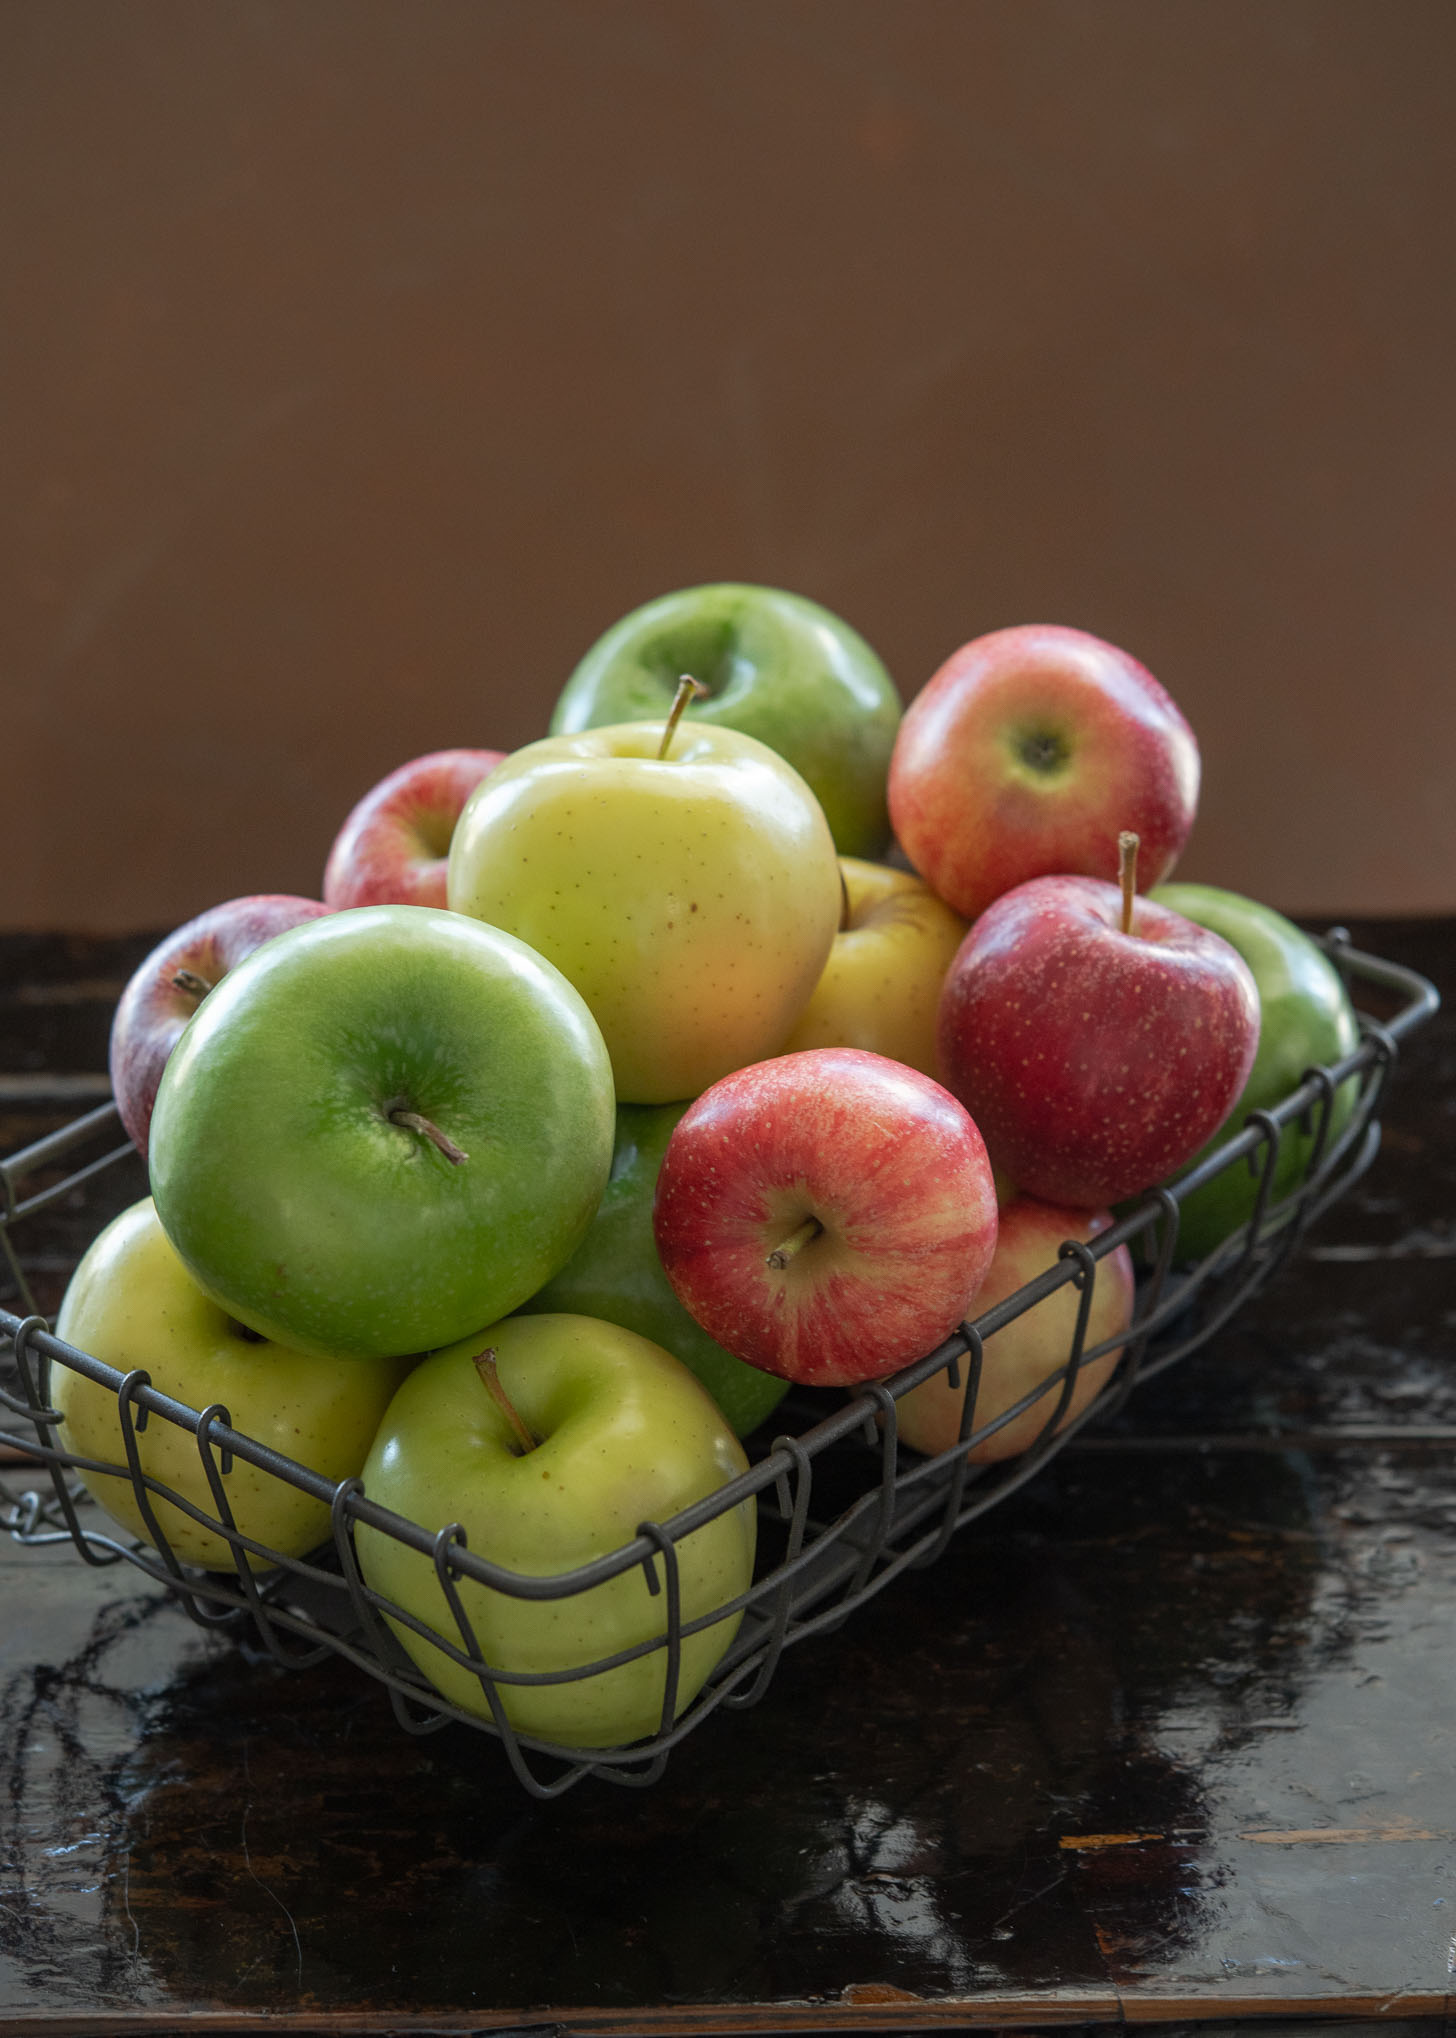 A variety of baking apples for making deep dish apple pie are collected in a basket.